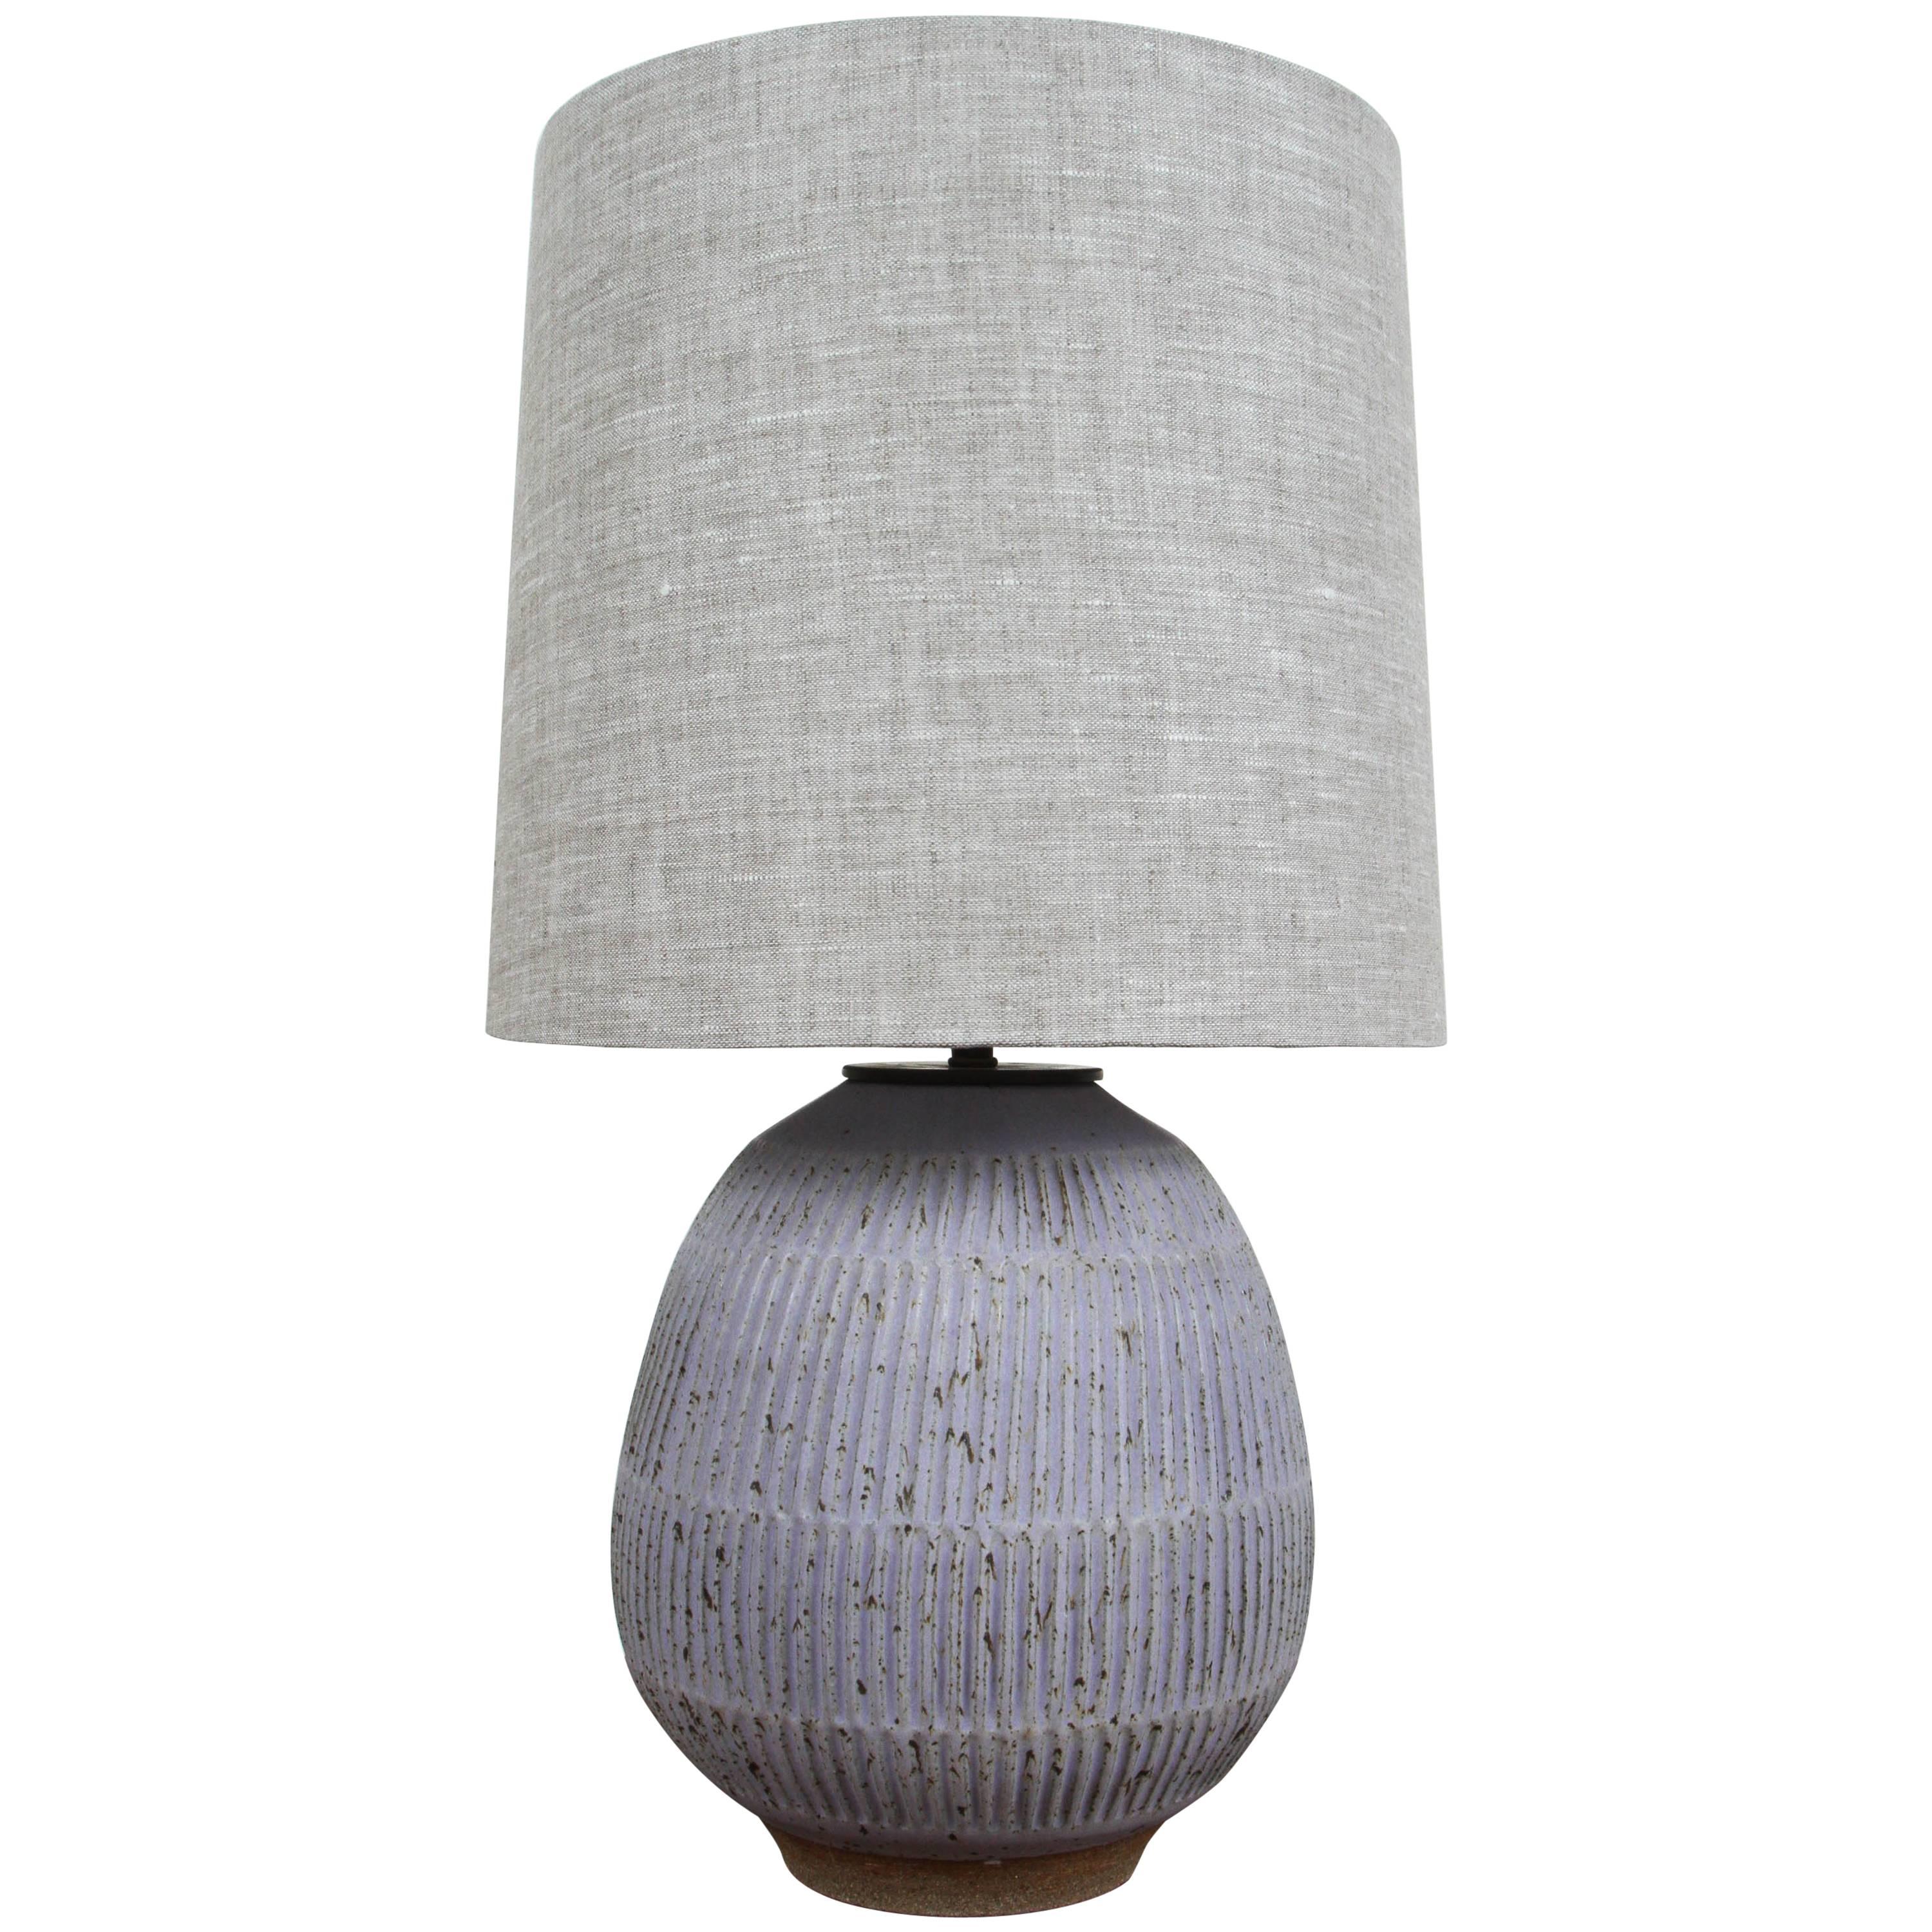 Hand-Carved Lavender Stoneware Lamp by Mt. Washington Pottery